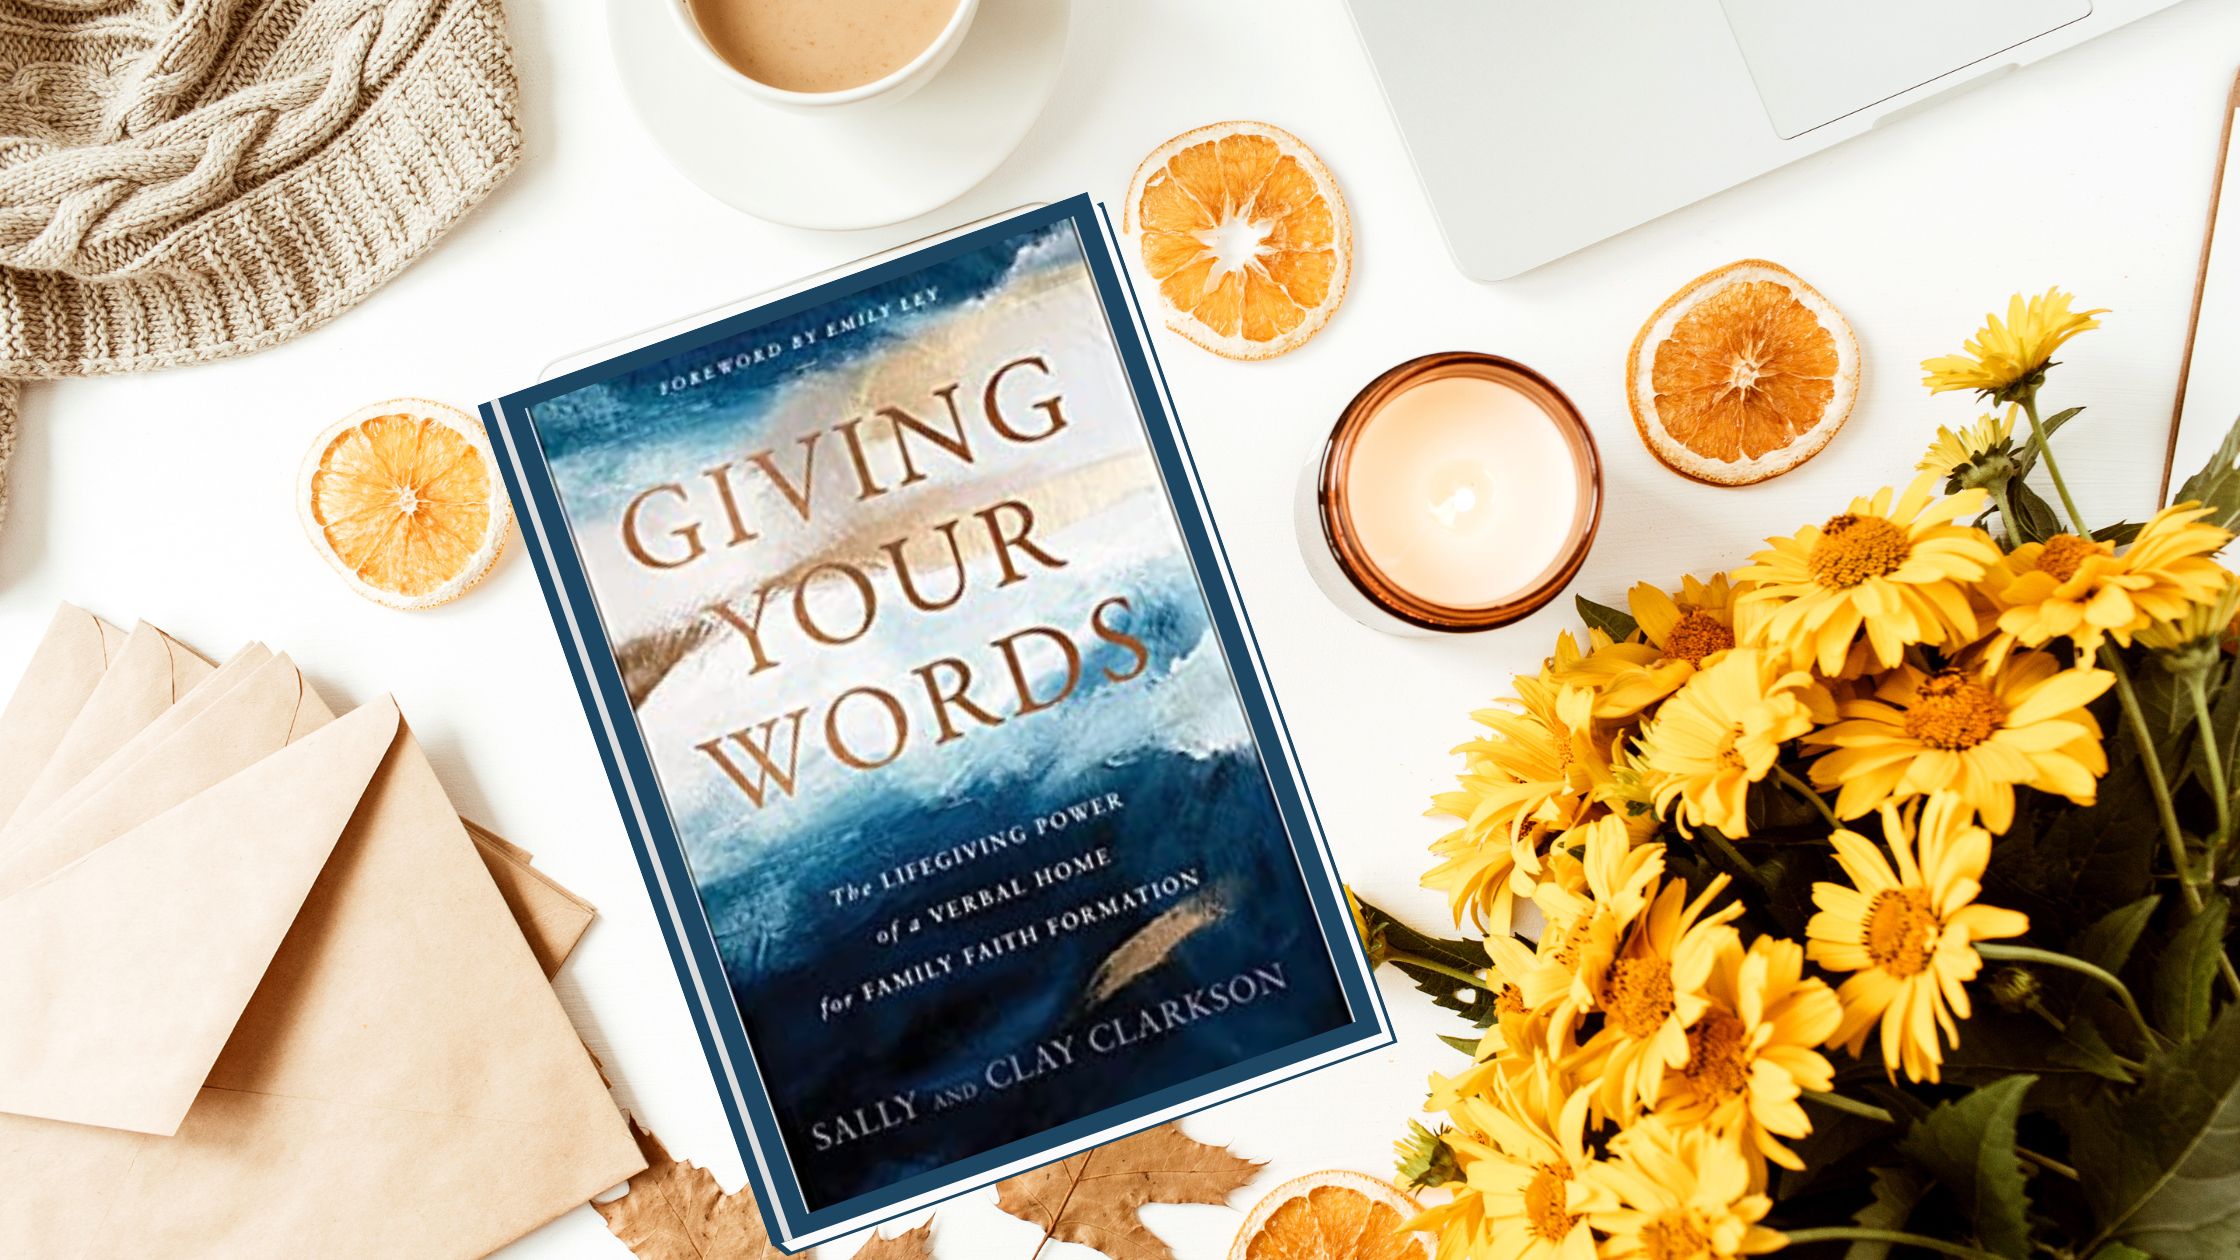 Book Review: Giving Your Words by Clay and Sally Clarkson